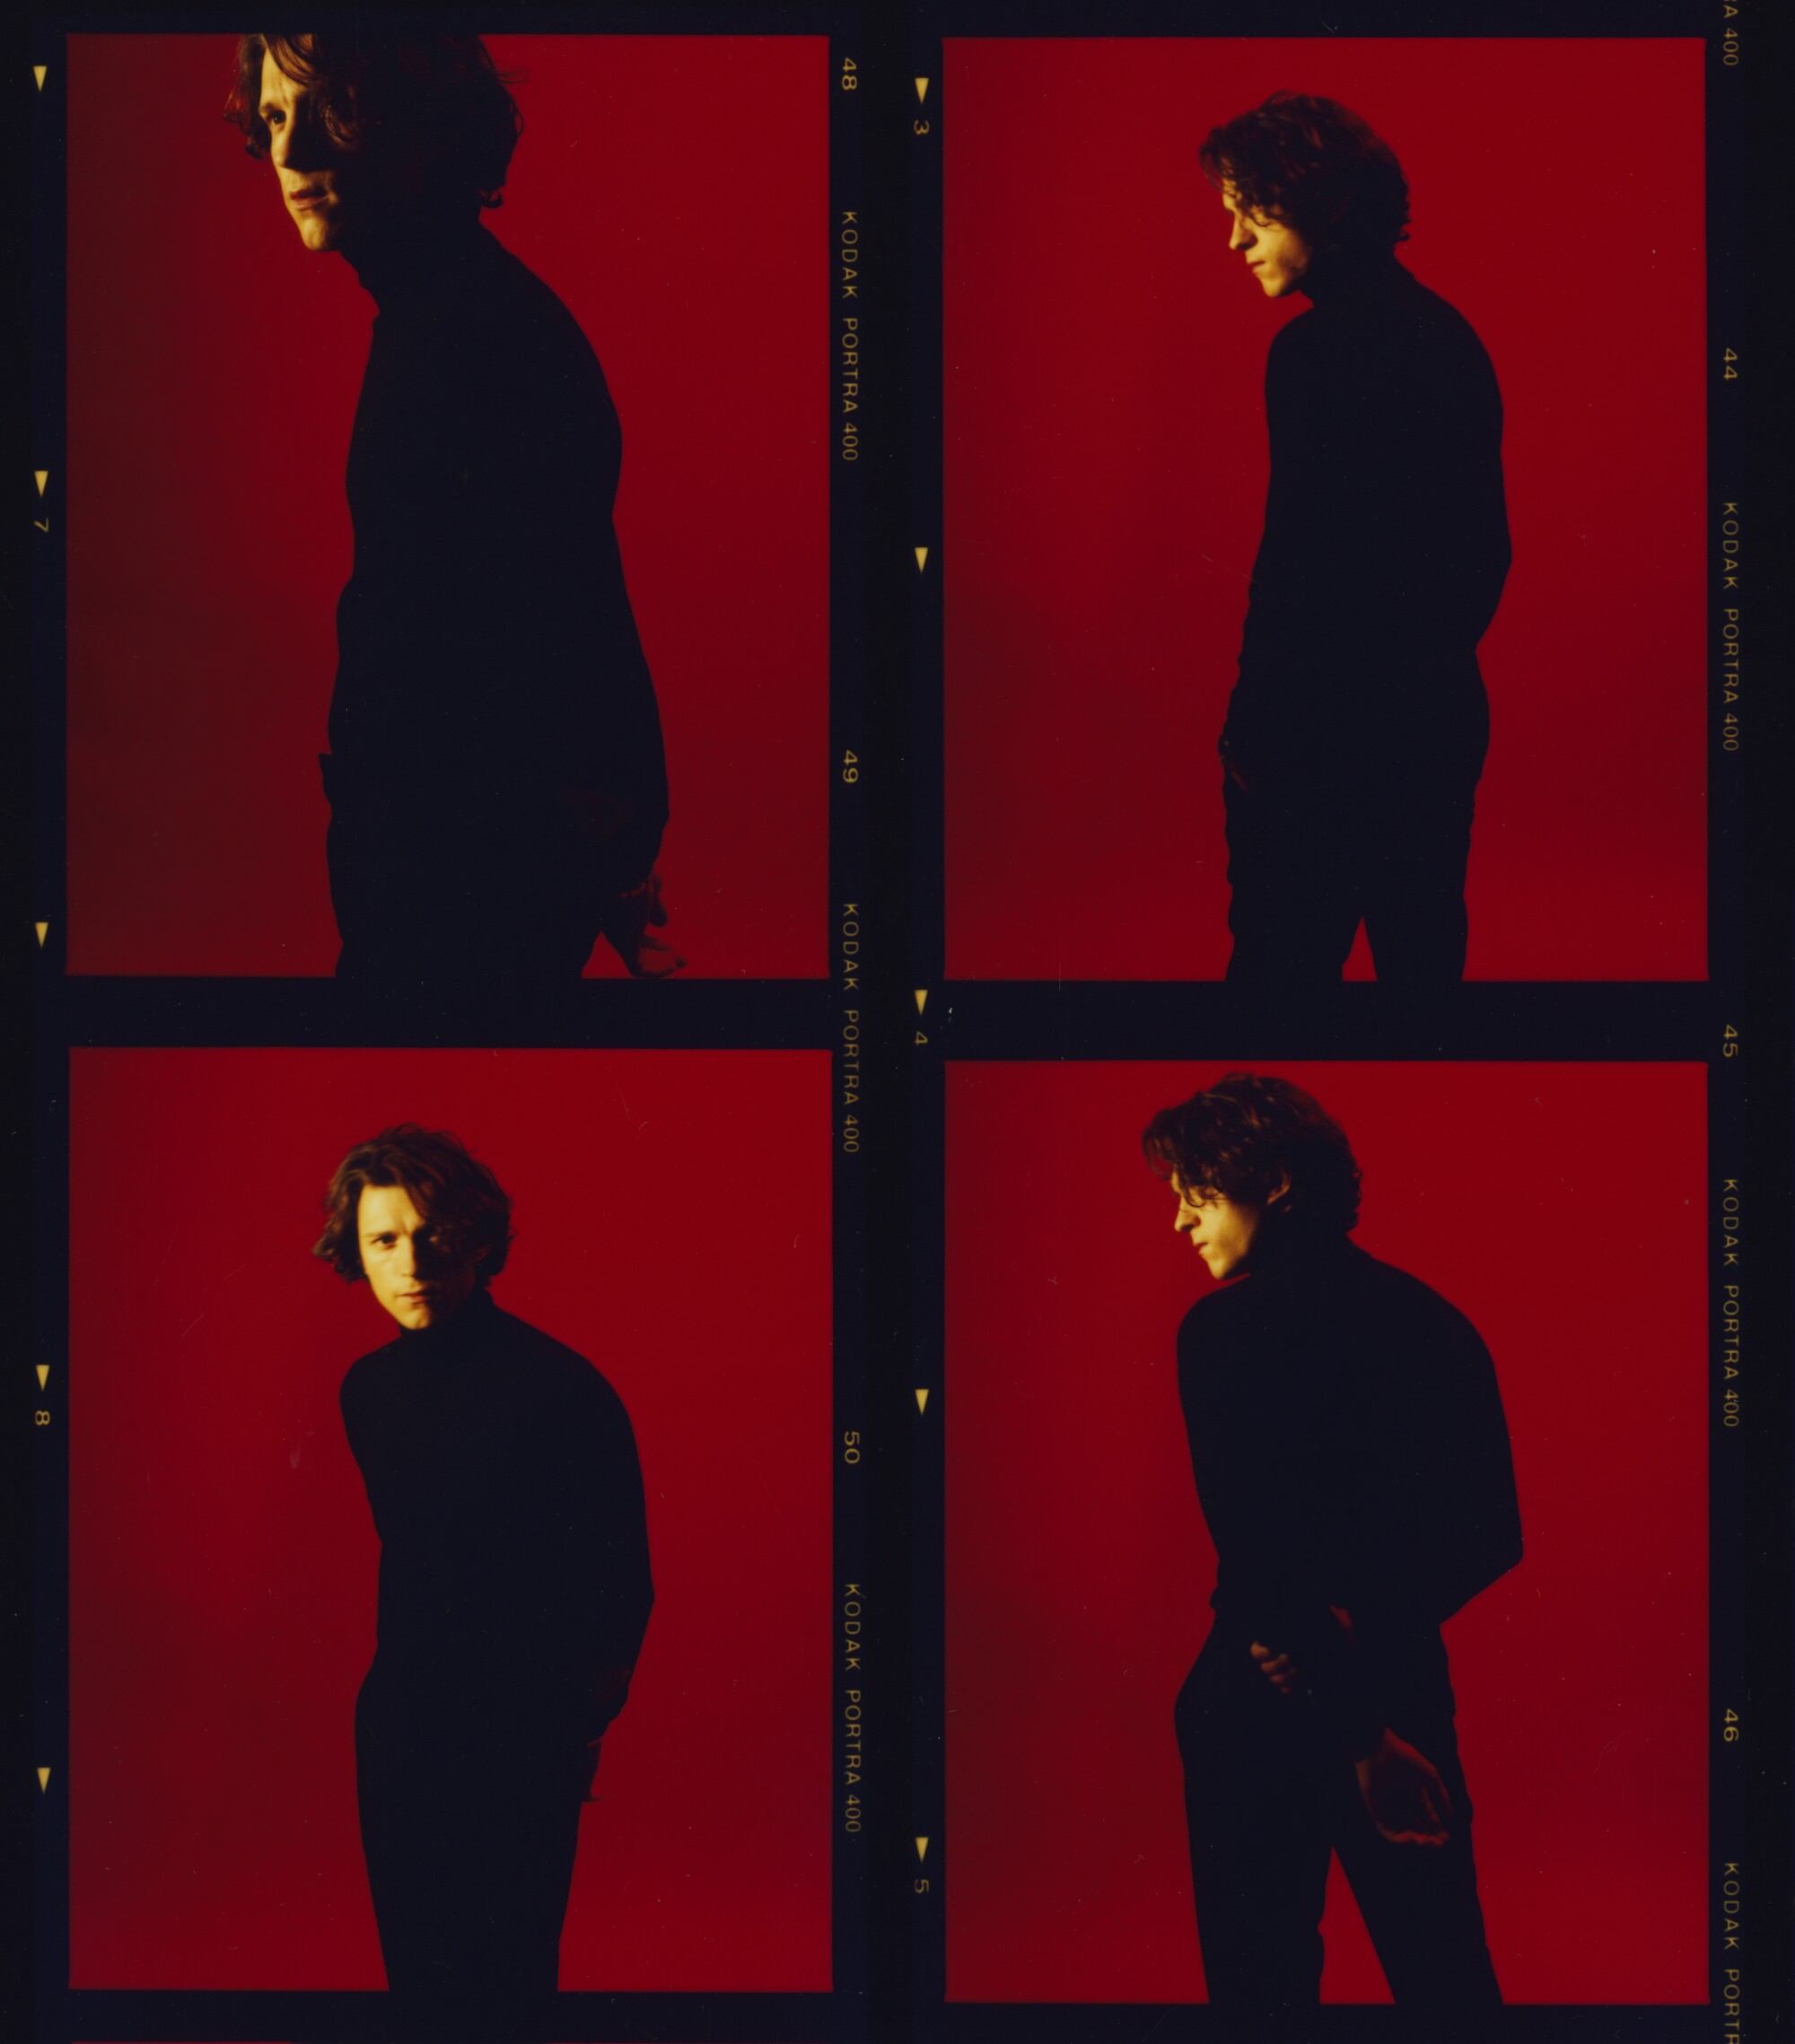  Four panels show photo portraits of Tom Holland against a deep red background.